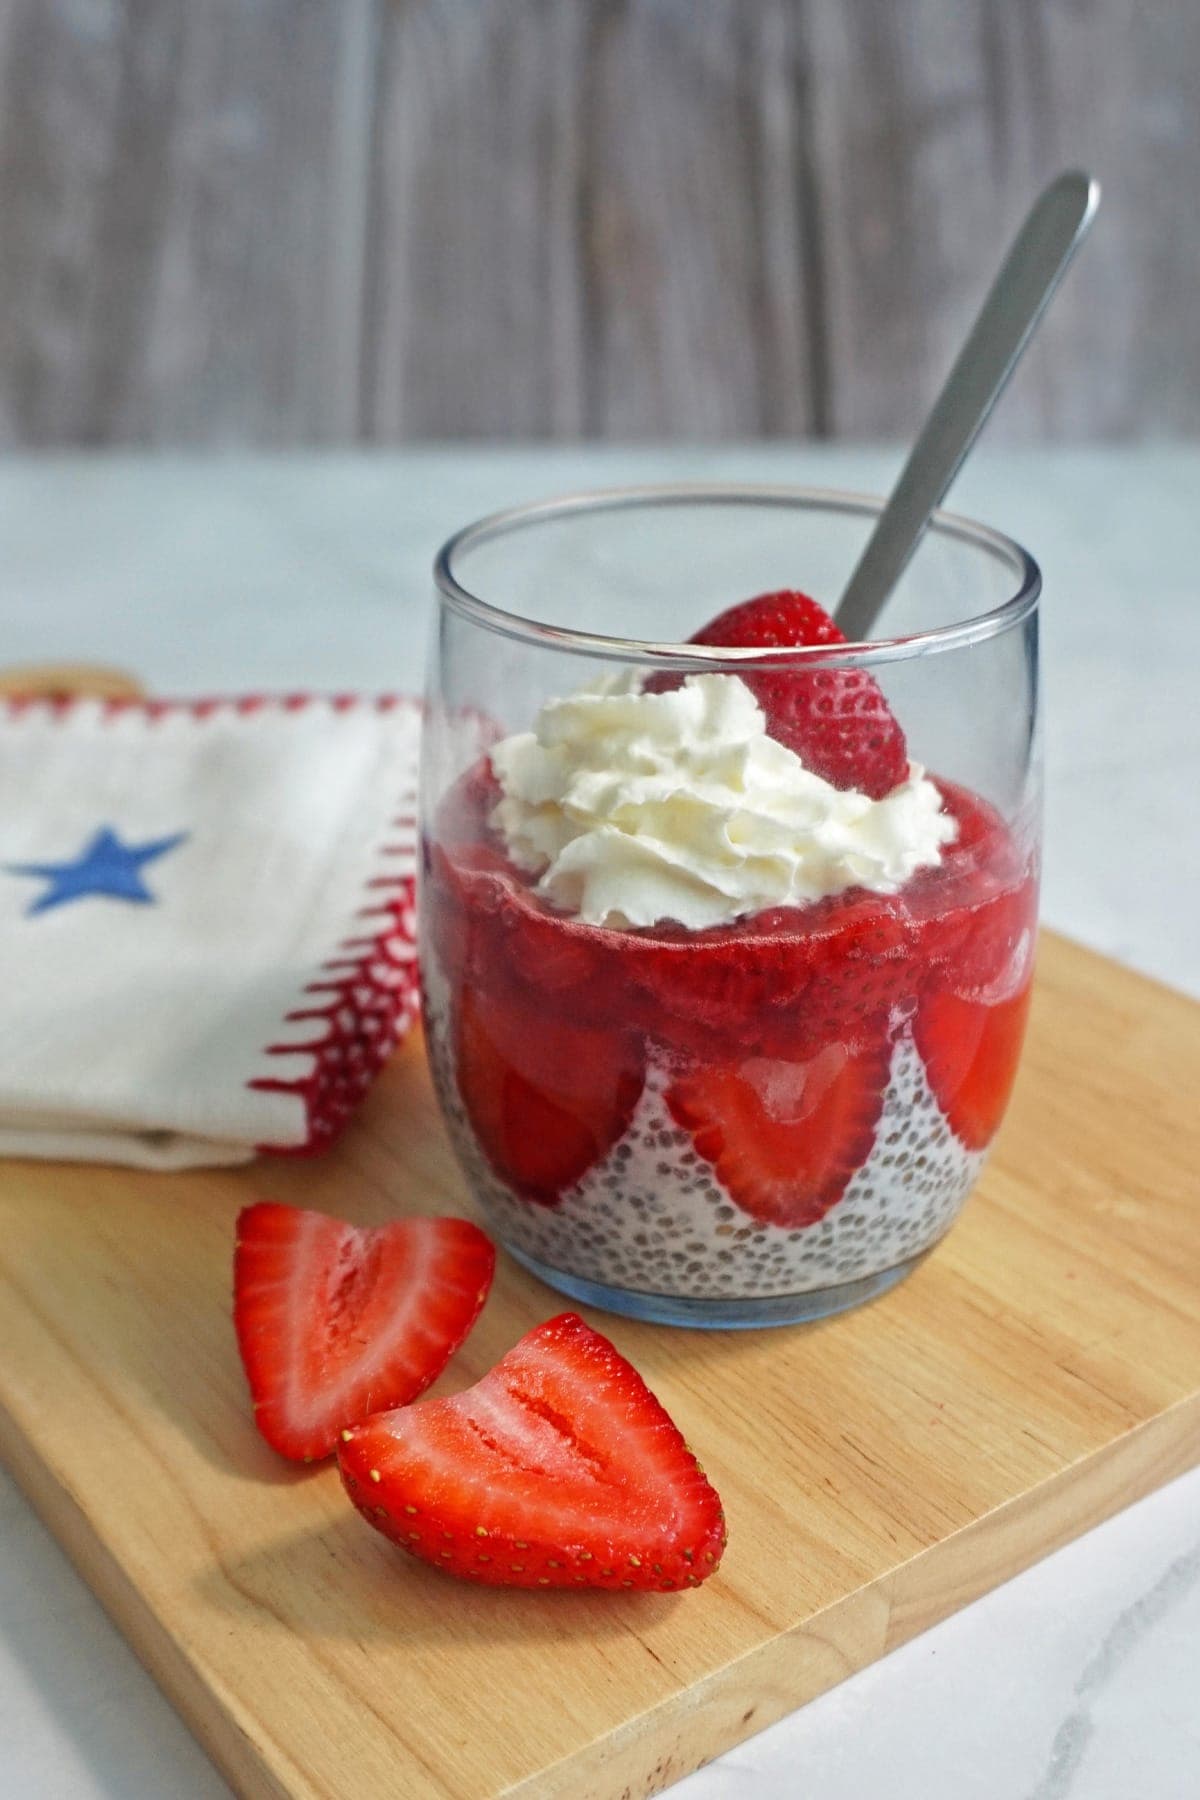 Strawberry Chia Pudding with whipped cream